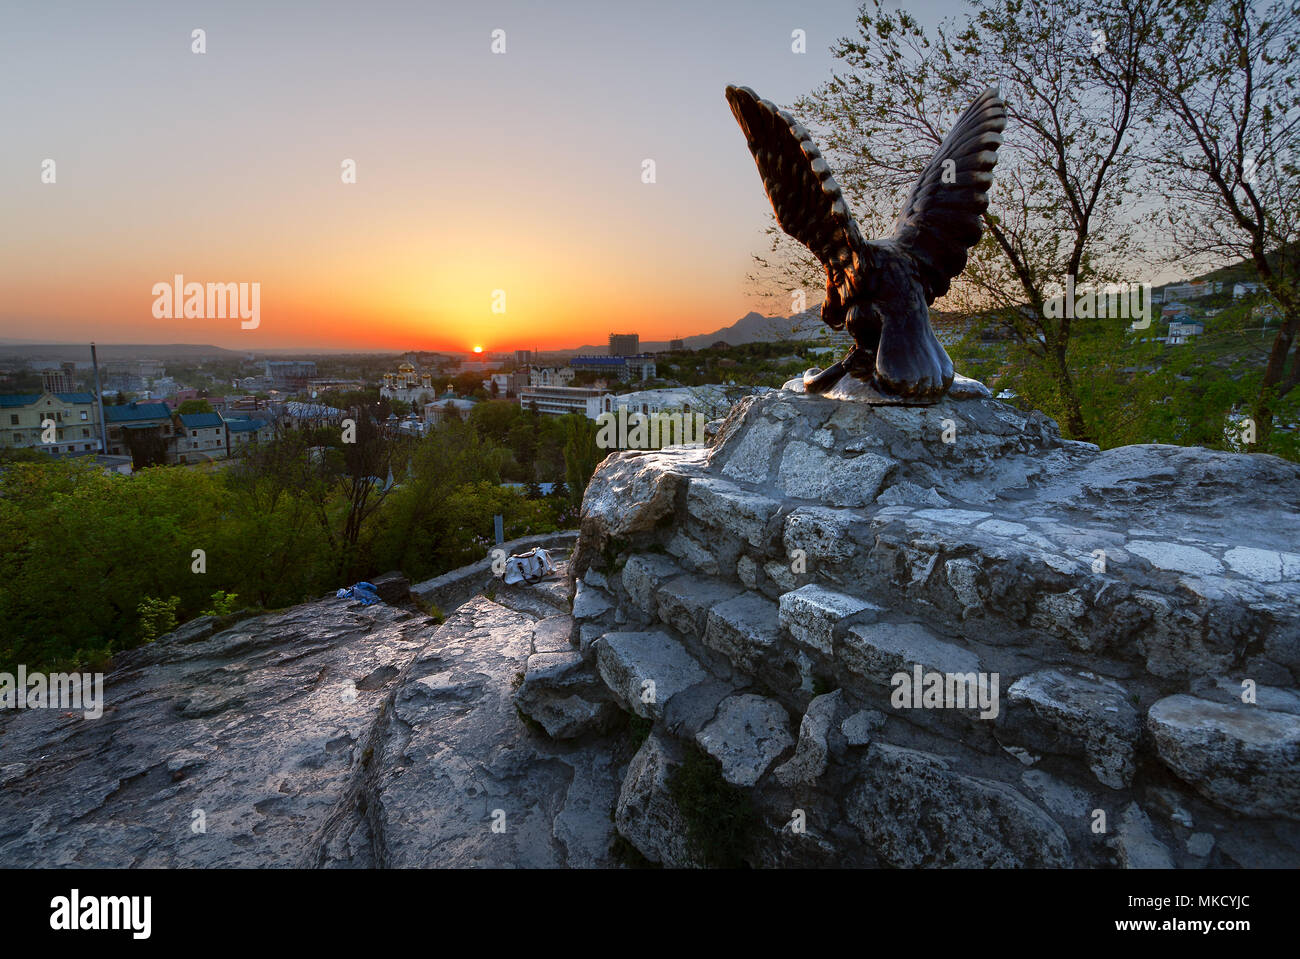 A monument for The Eagle, symbol of the city of Pyatifors, overseeing the city and Tsvetnik Park, Pyatigorsk, Russia Stock Photo